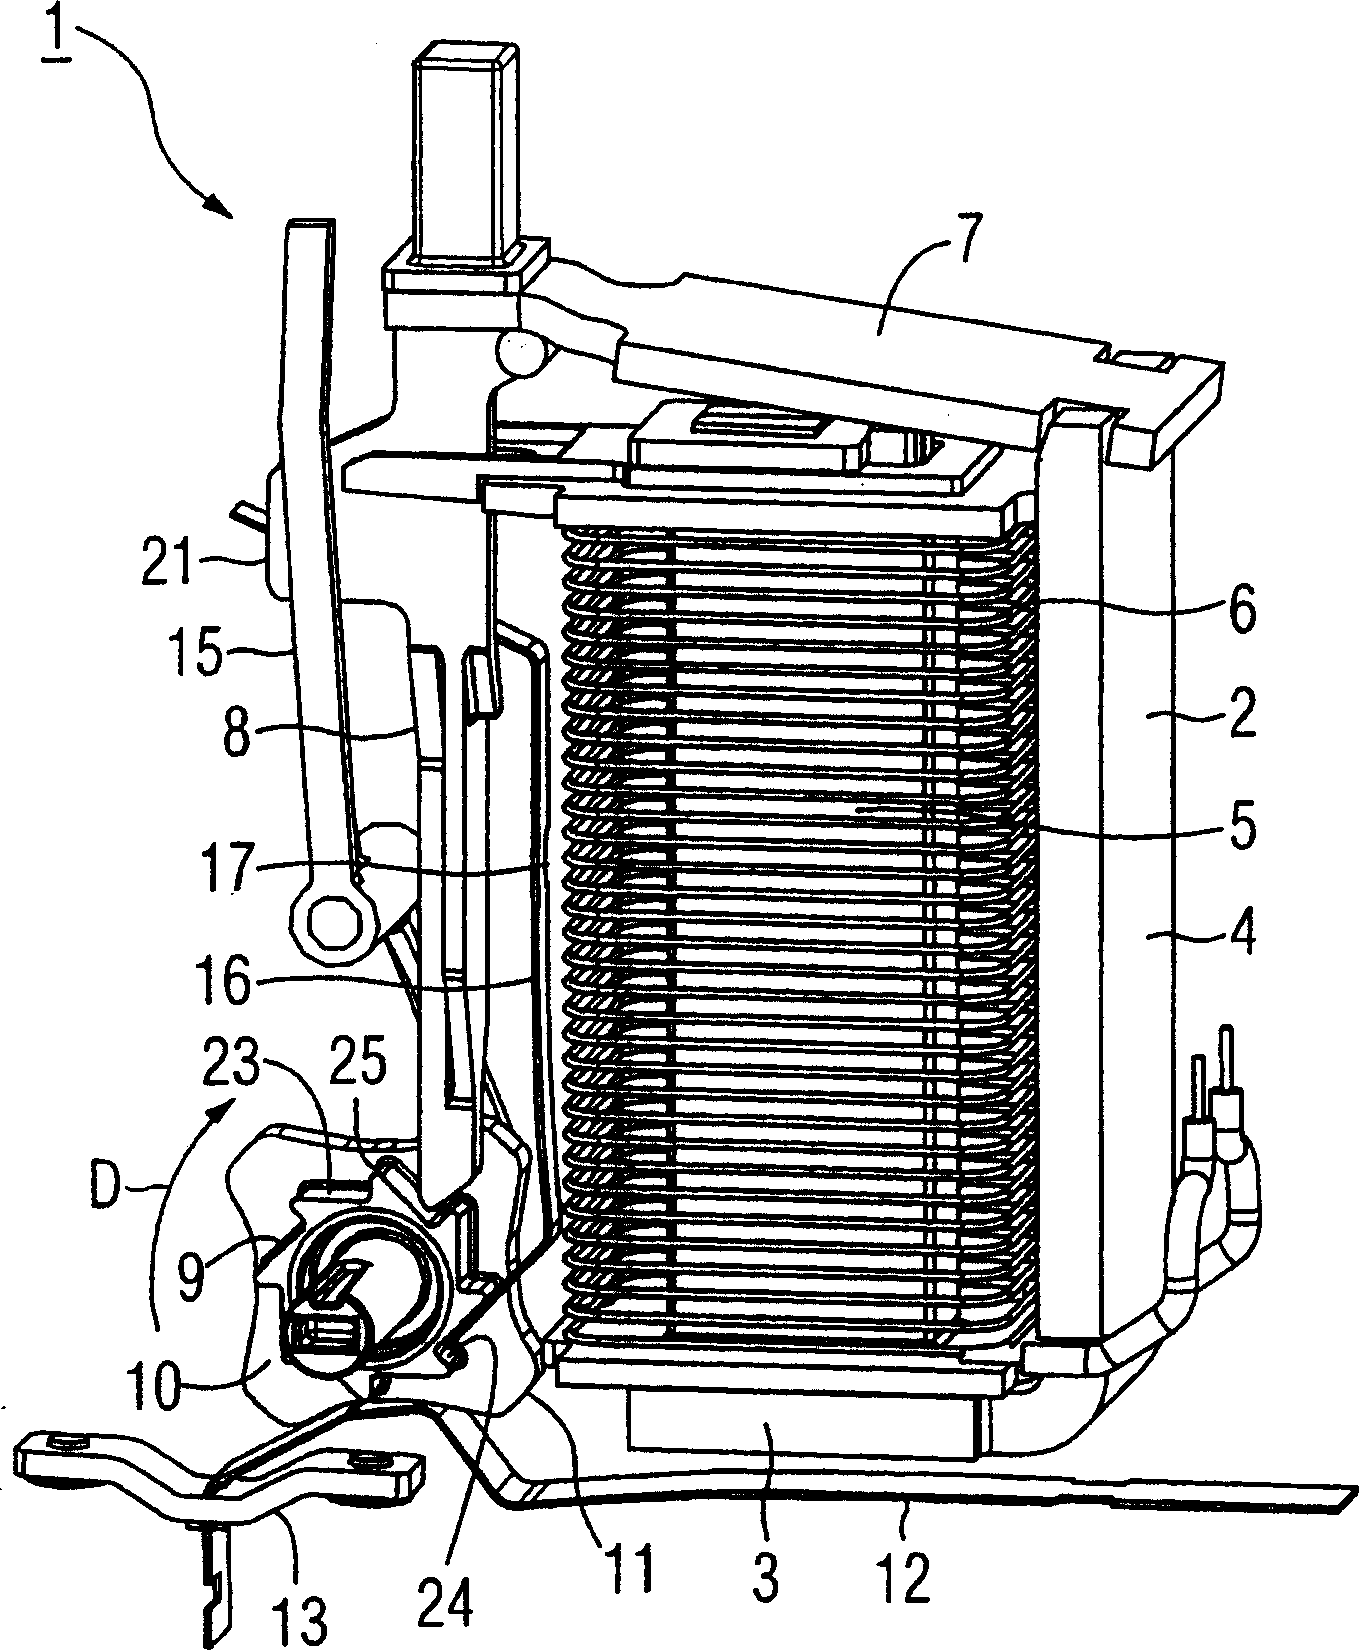 Stepping switch mechanism